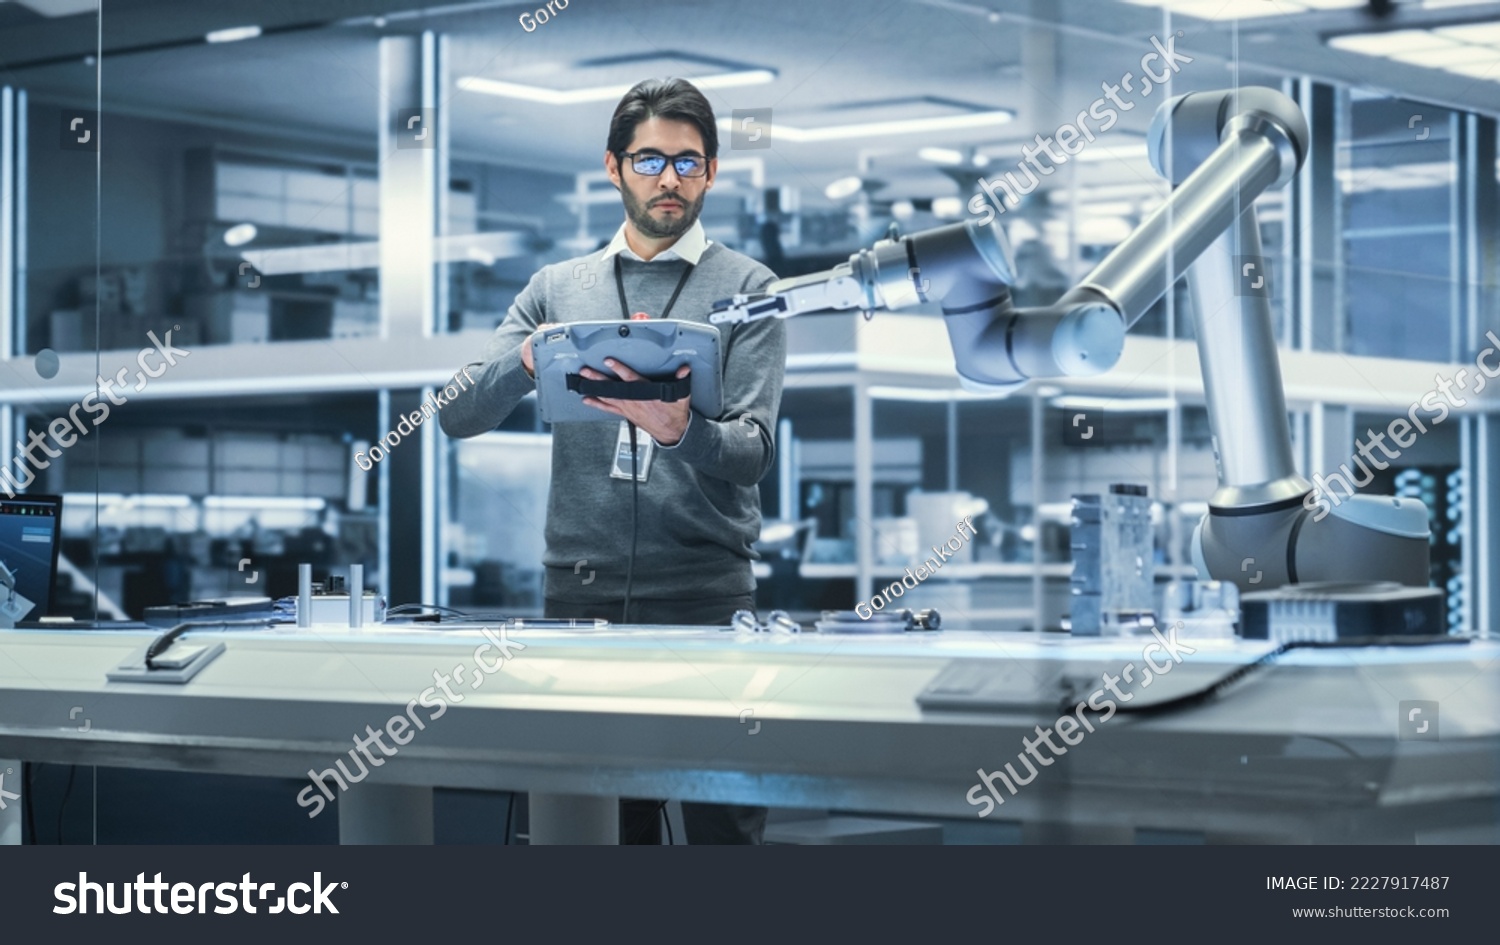 Robotics Engineer Researching and Developing a Technological Robot Arm Project, Standing with Tablet Computer in Scientific Technology Lab. Young Male Working on an AI Robotic Arm. #2227917487